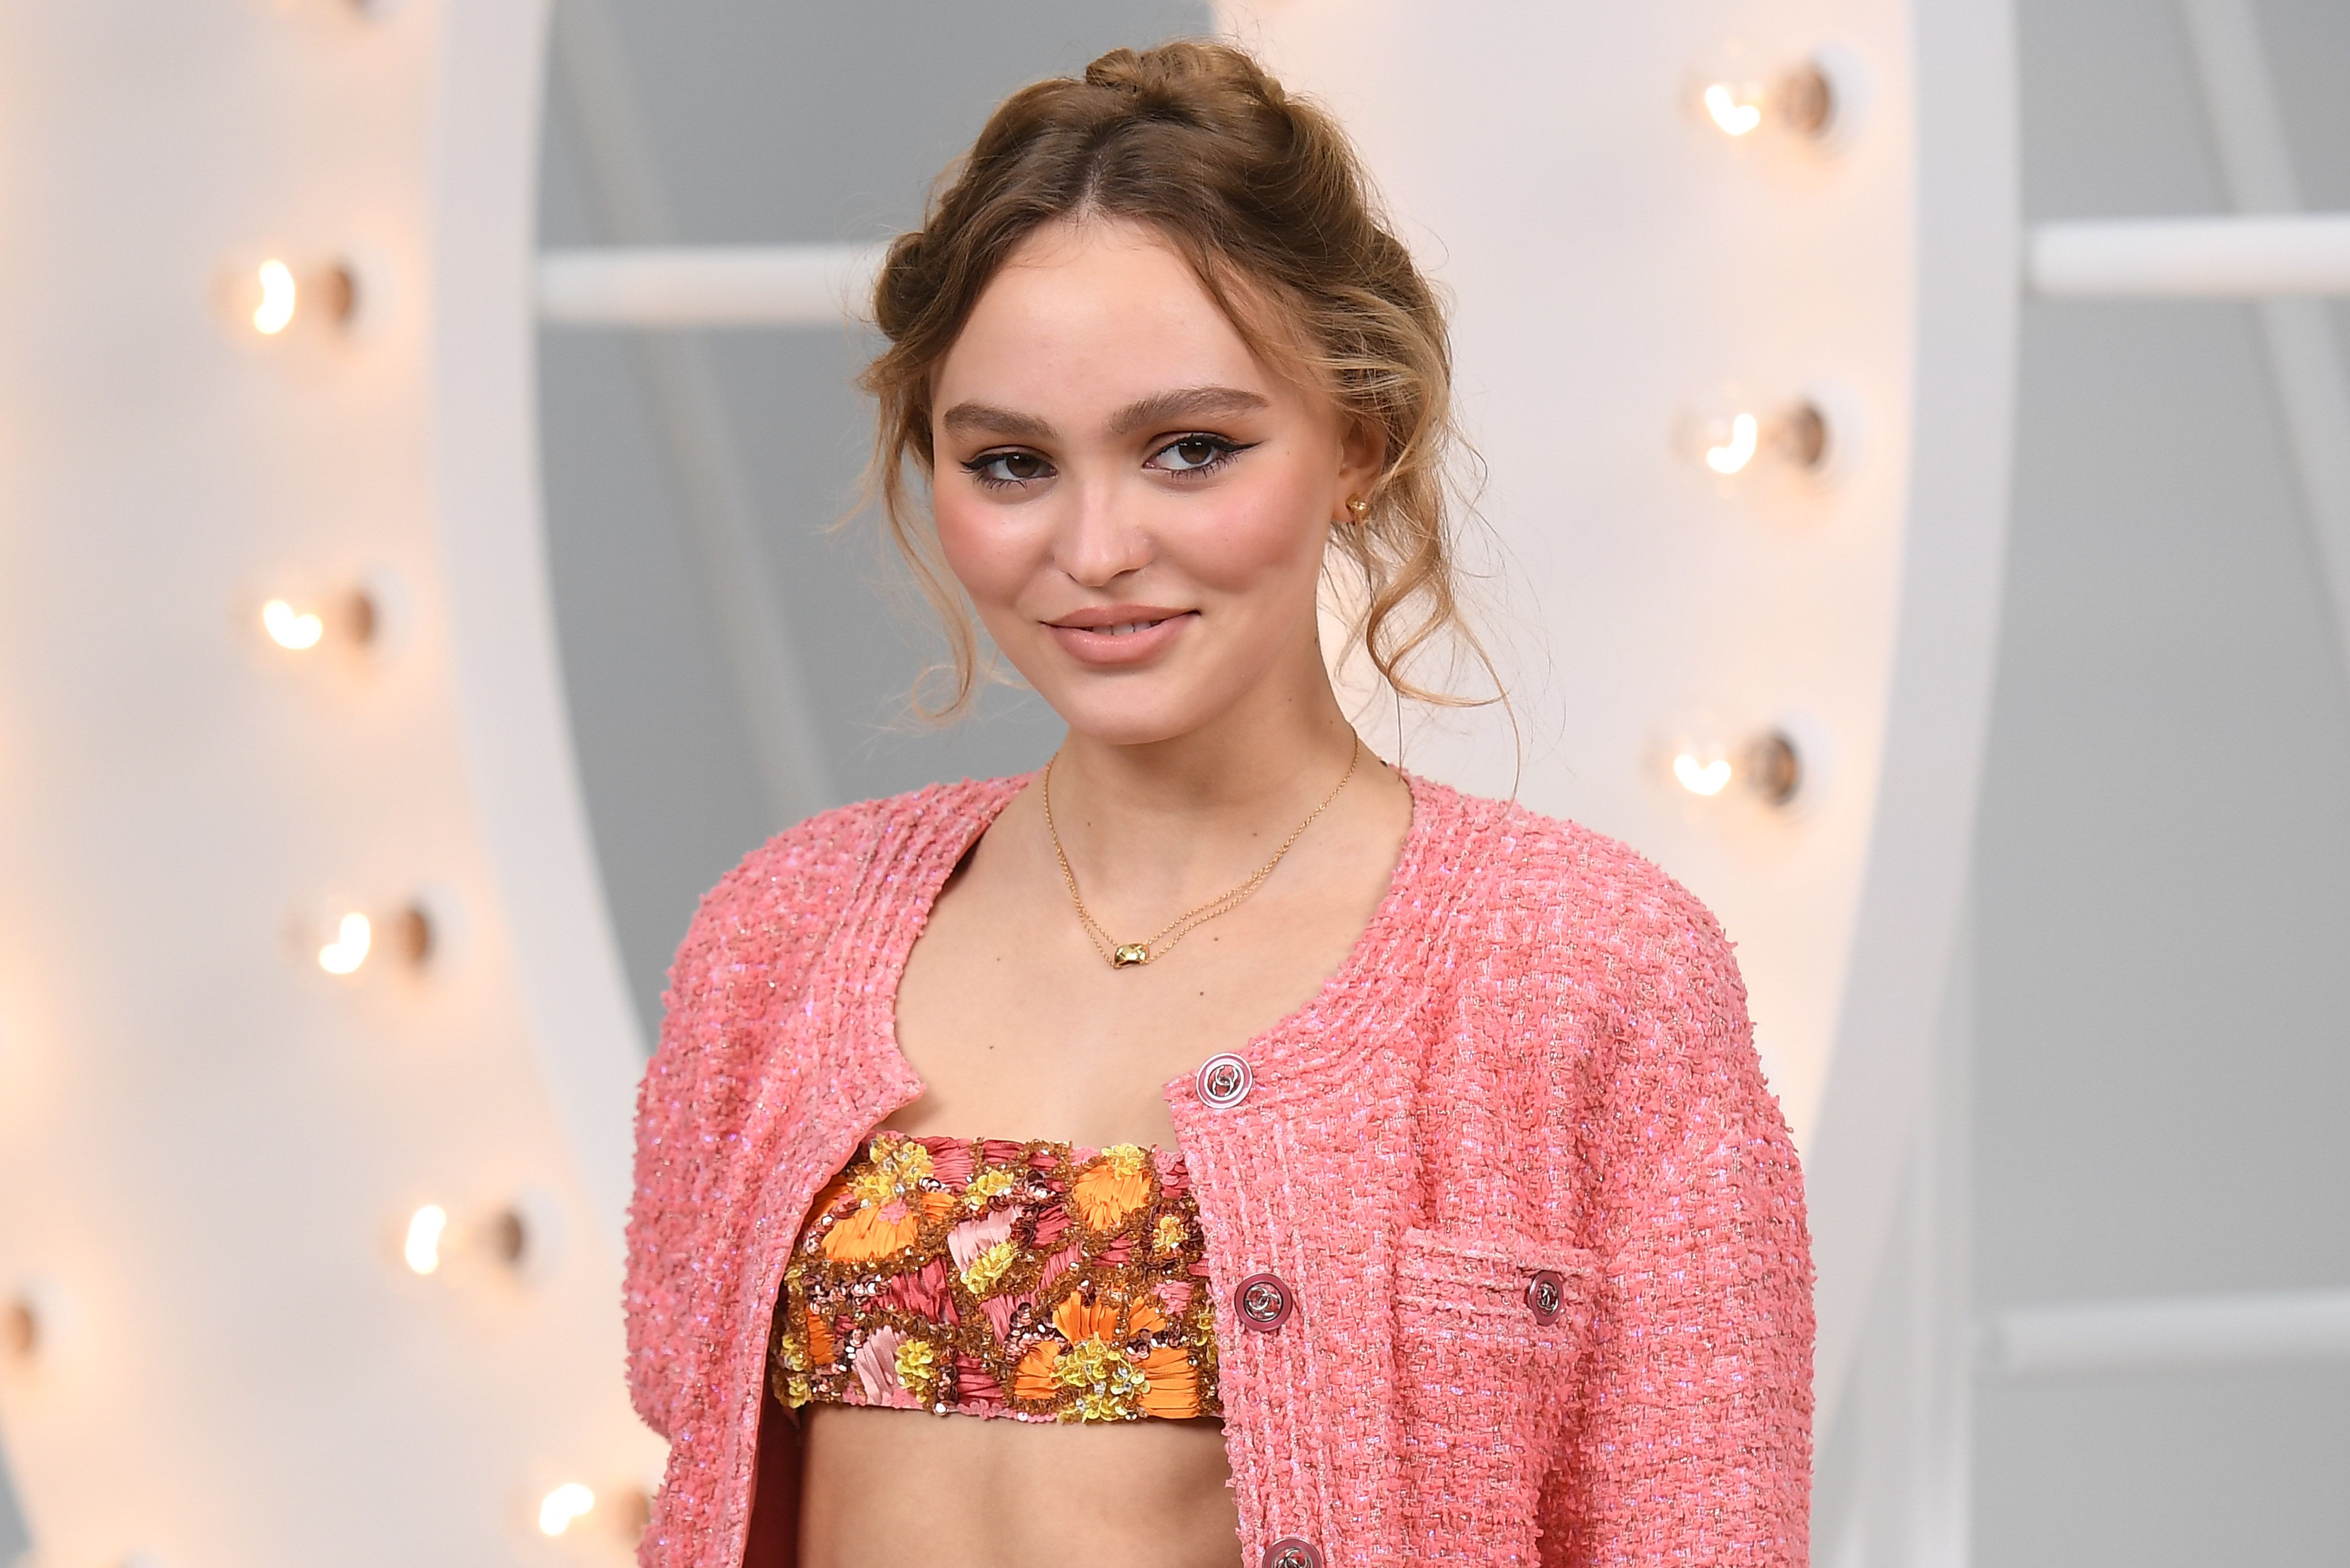 Lily-Rose Depp attends the Chanel Womenswear Spring/Summer 2021 show during Paris Fashion Week on October 6, 2020 in Paris, France. | Source: Getty Images